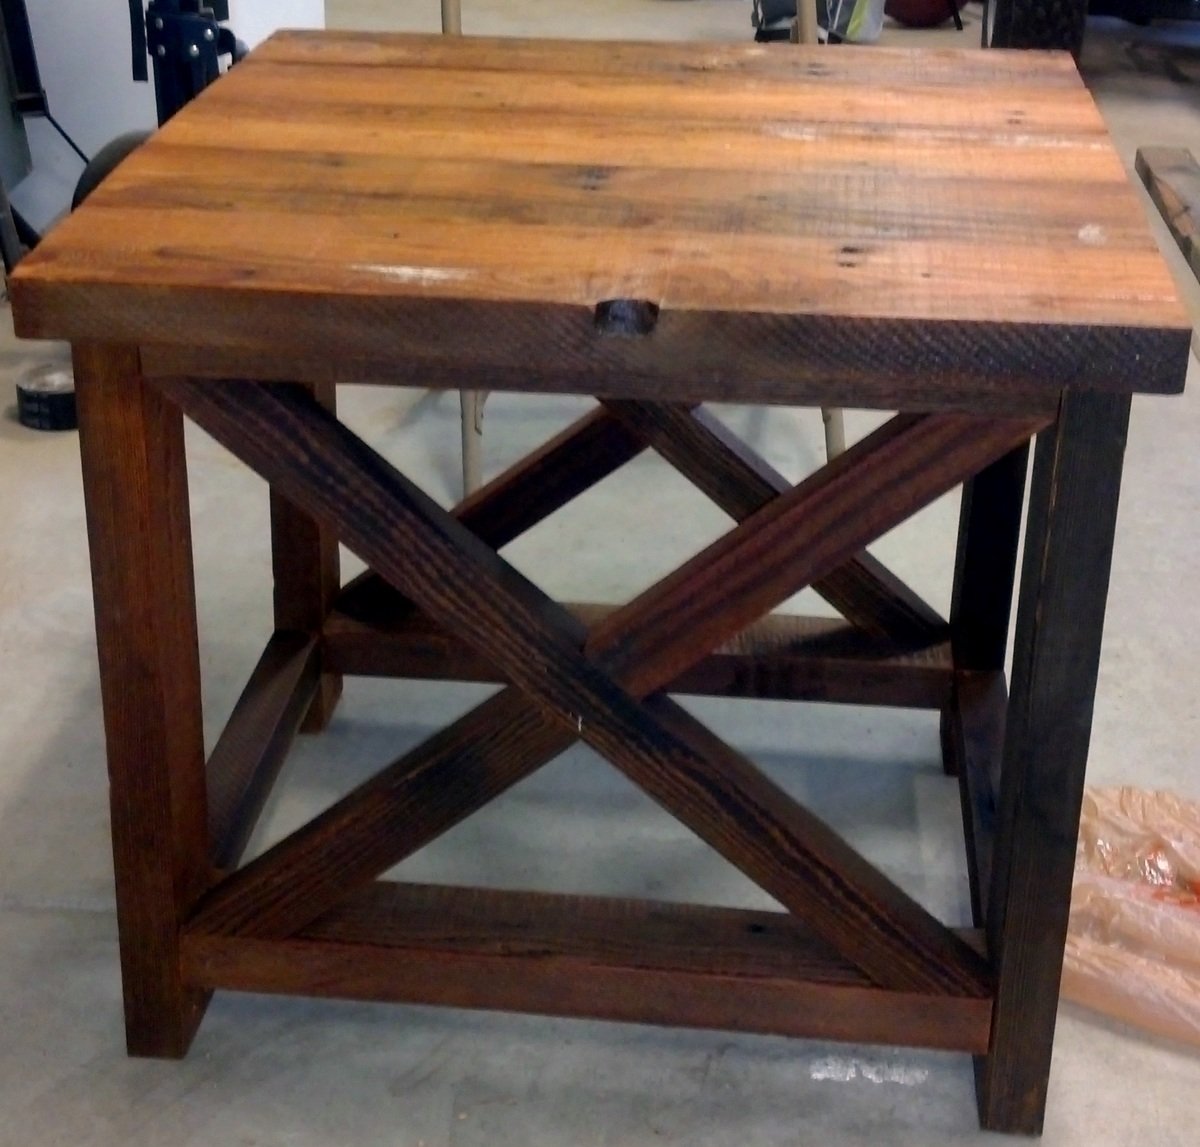 Rustic X end table | Ana White